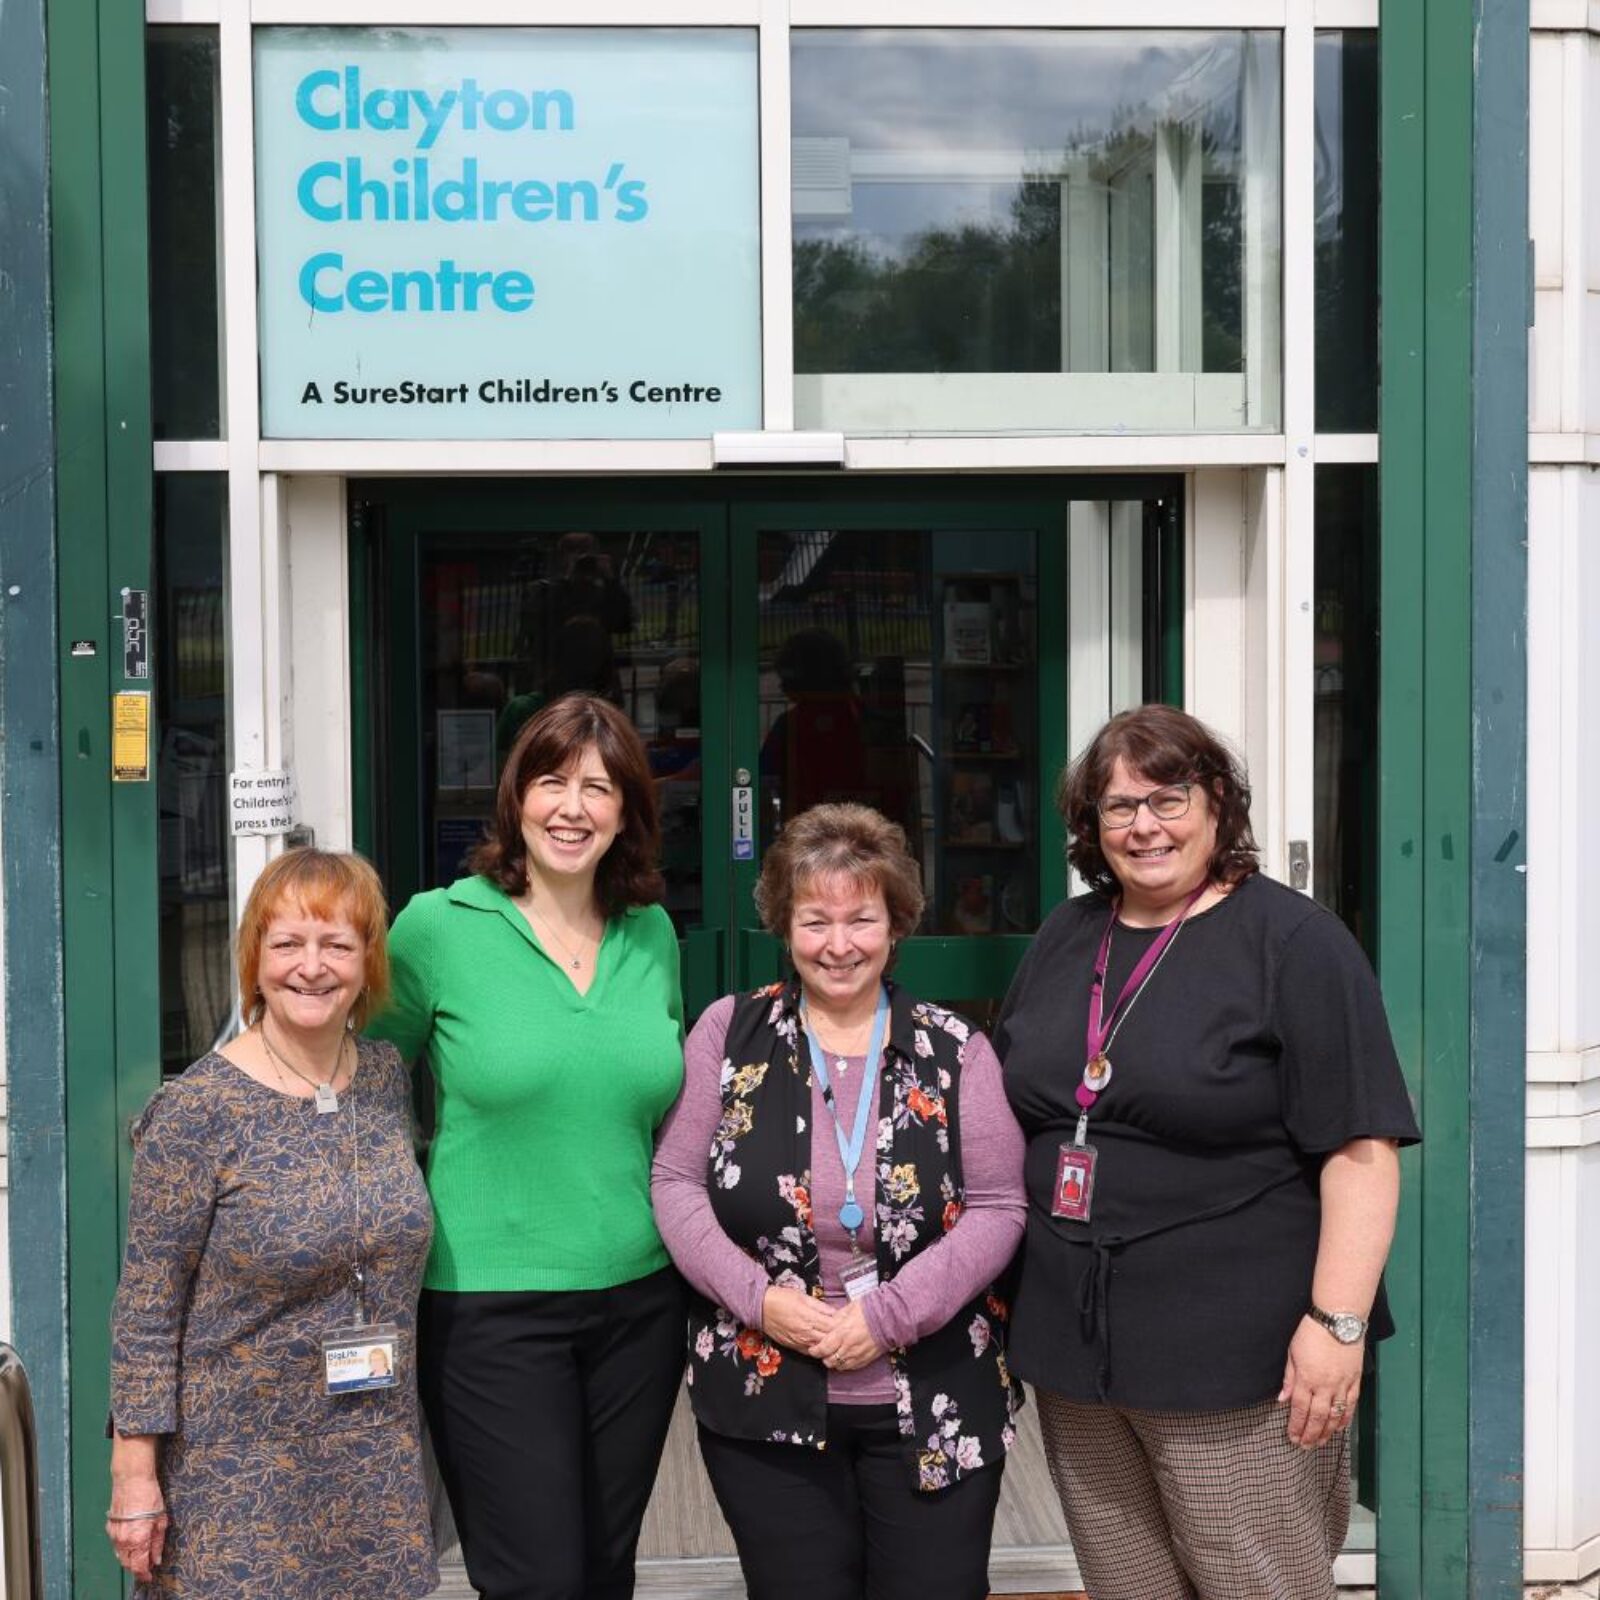 Lucy Powell visiting the Sure Start Centre in Claytion